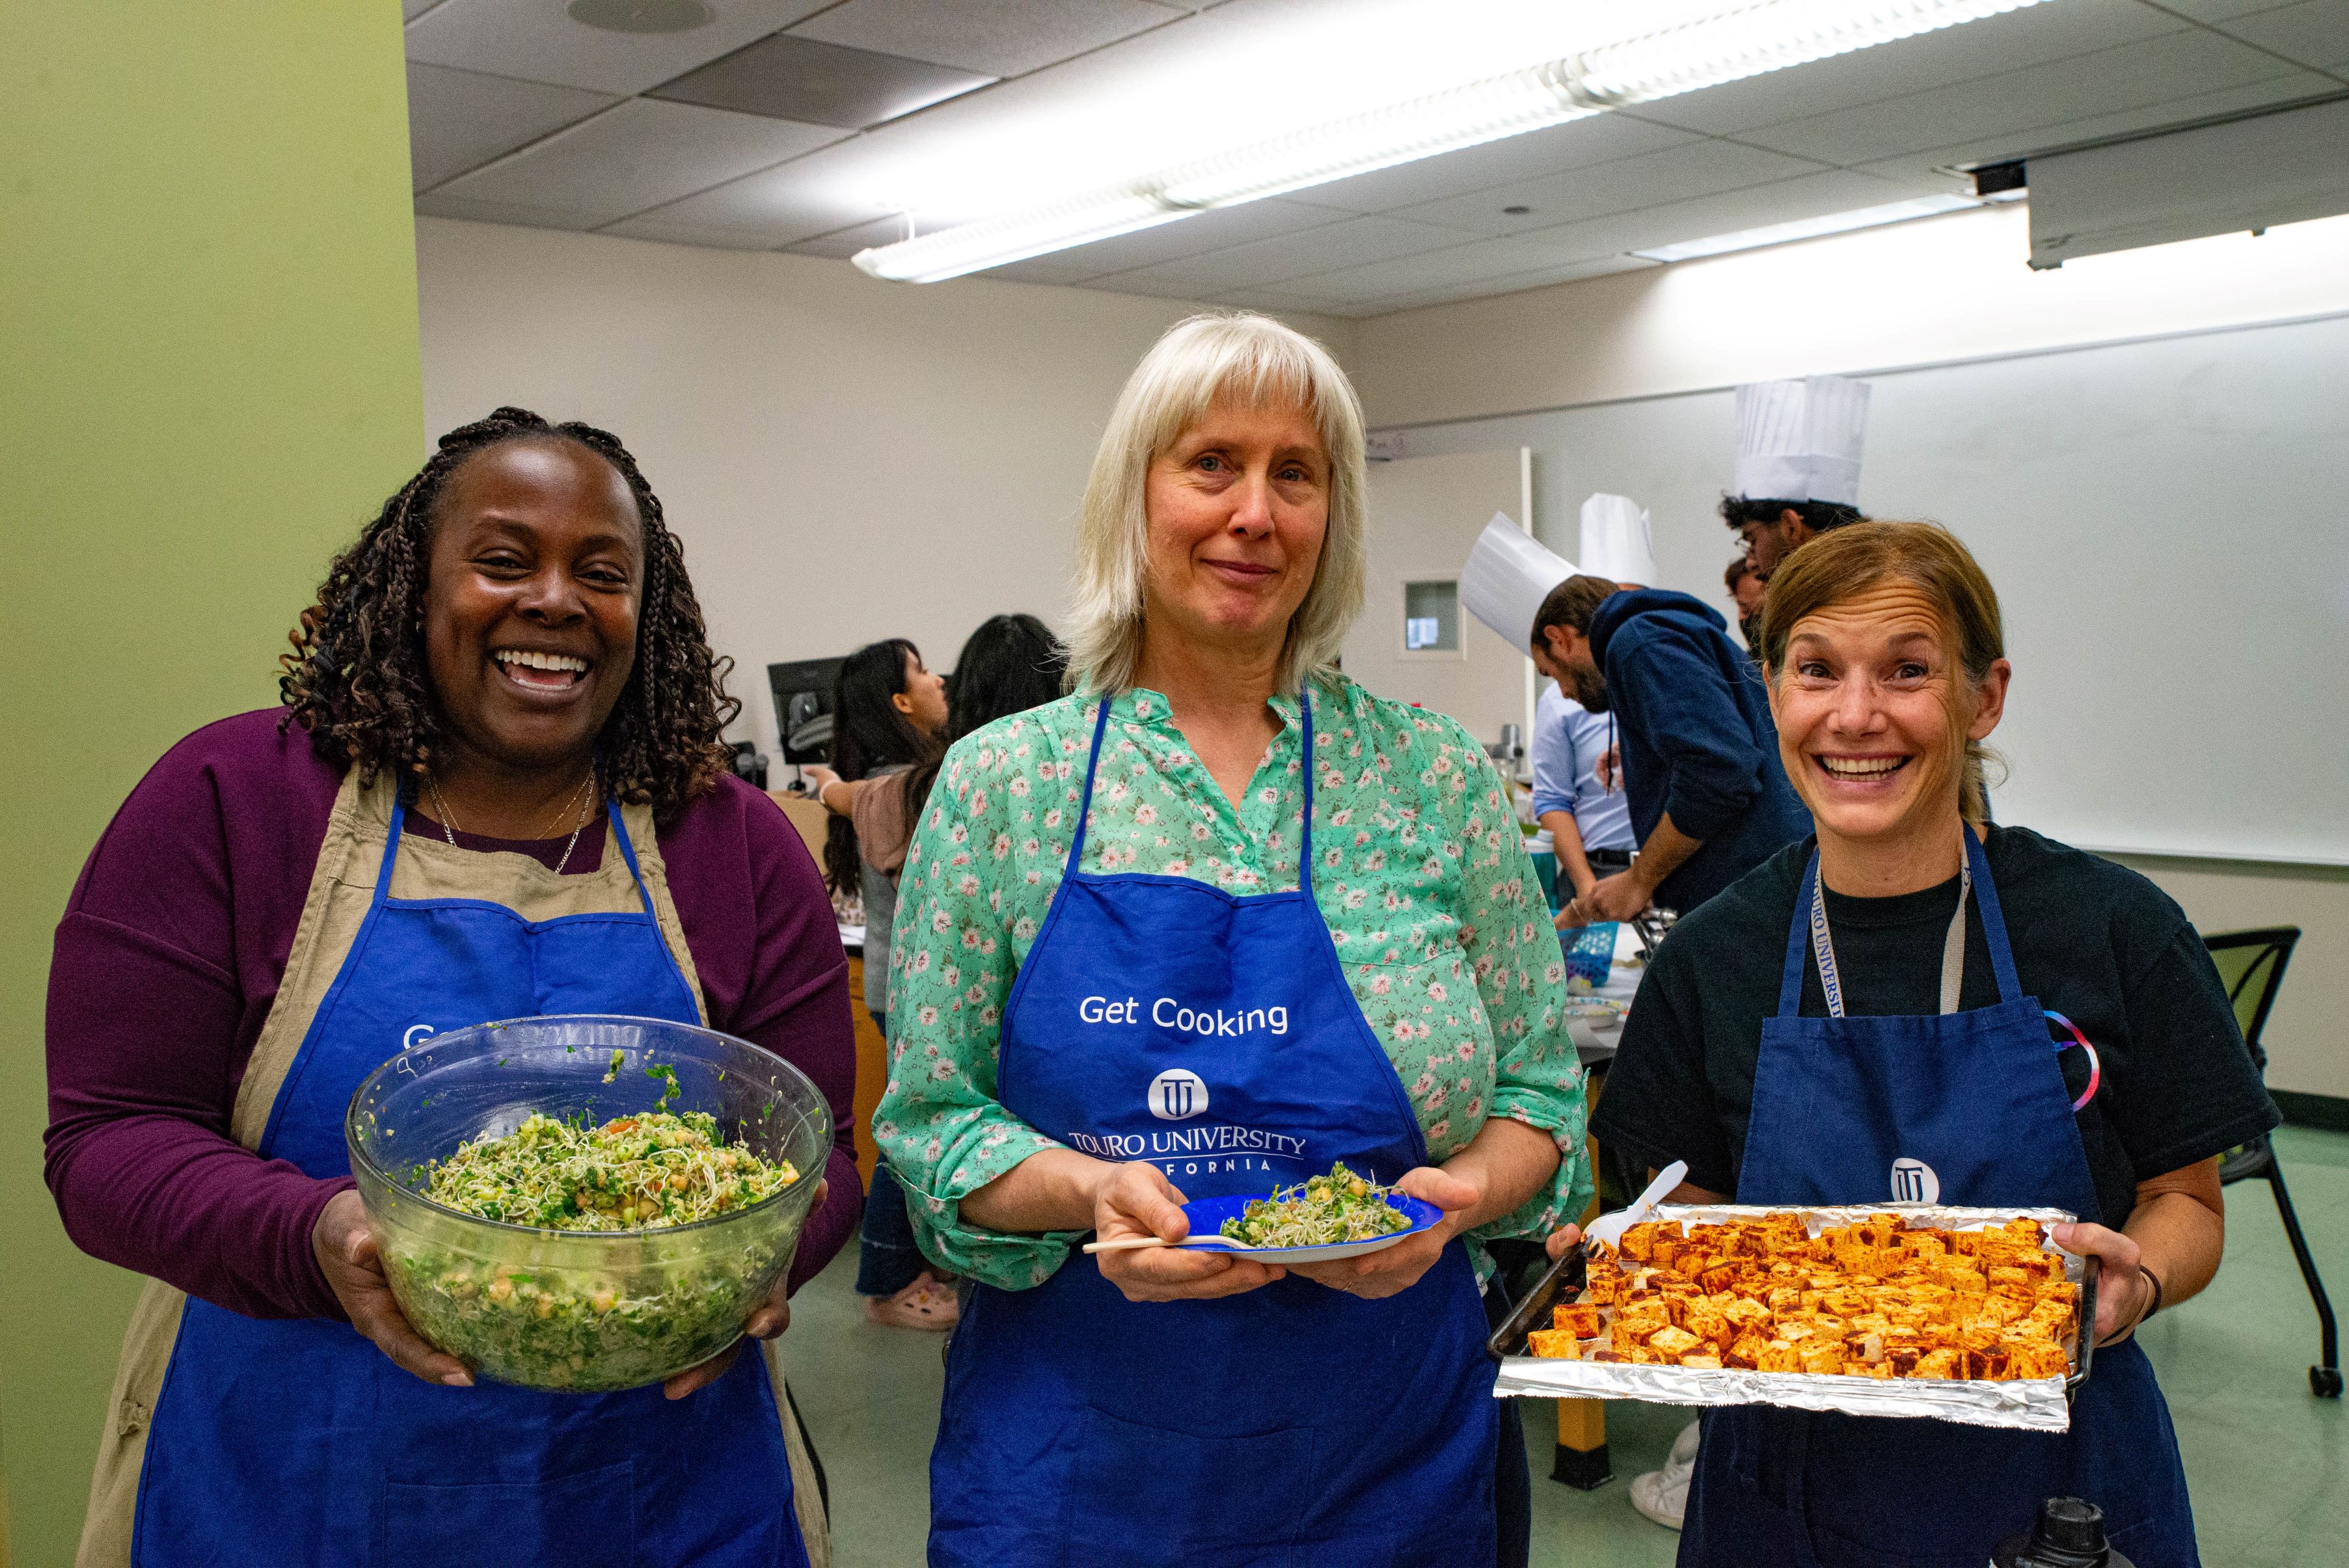 Drs. Grace Marie Jones, Gloria J. Klapstein, and Traci Stevenson from the College of Medicine wearing aprons and holding some of the dishes the medical students cooked up at a pre-clinical nutrition class